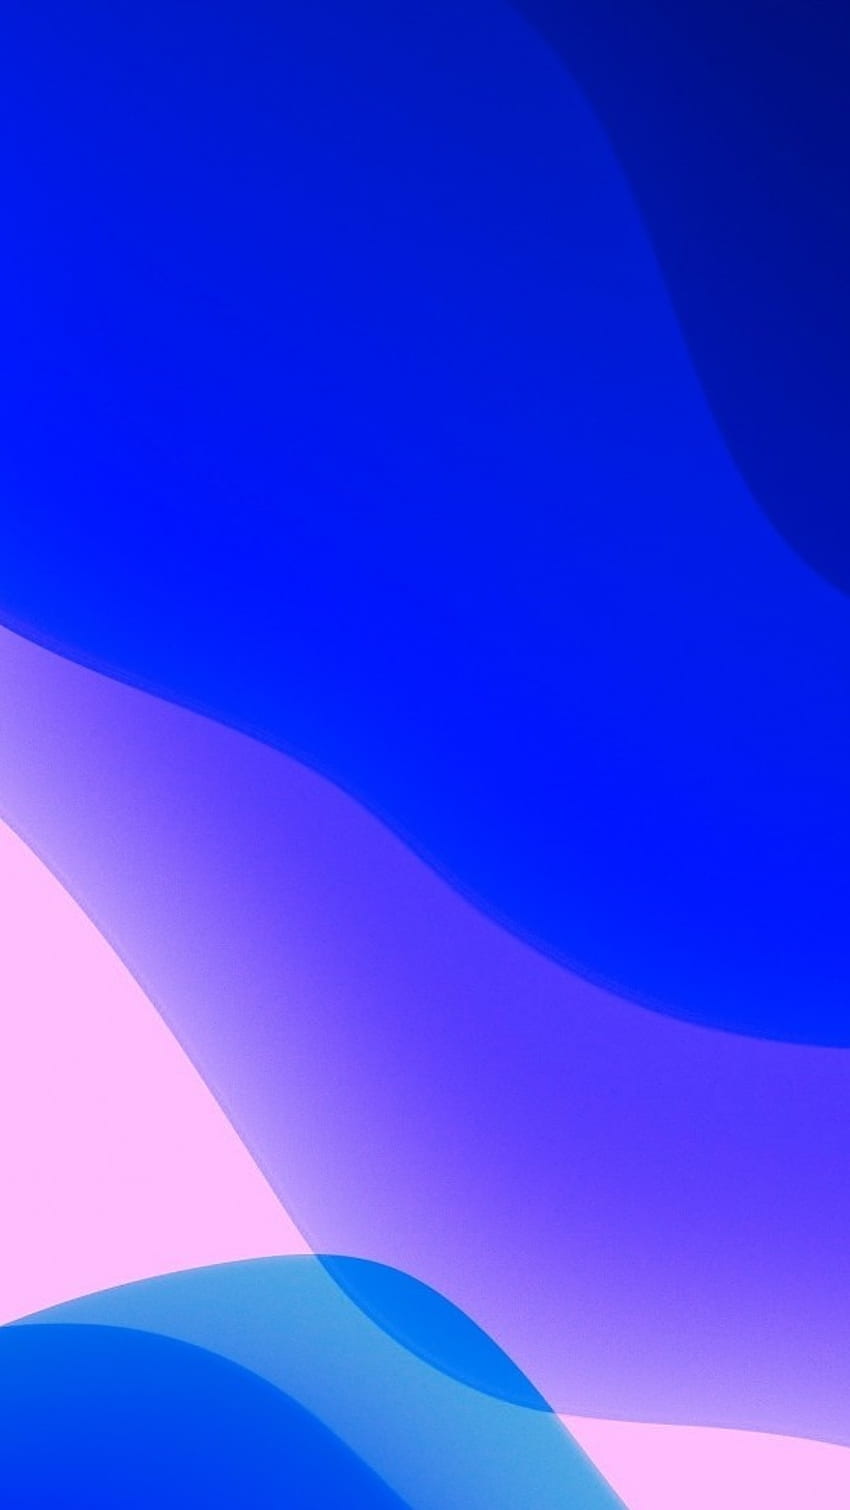 iPhone 13 Pro Wallpaper 4K, iOS 15, Stock, Blue background